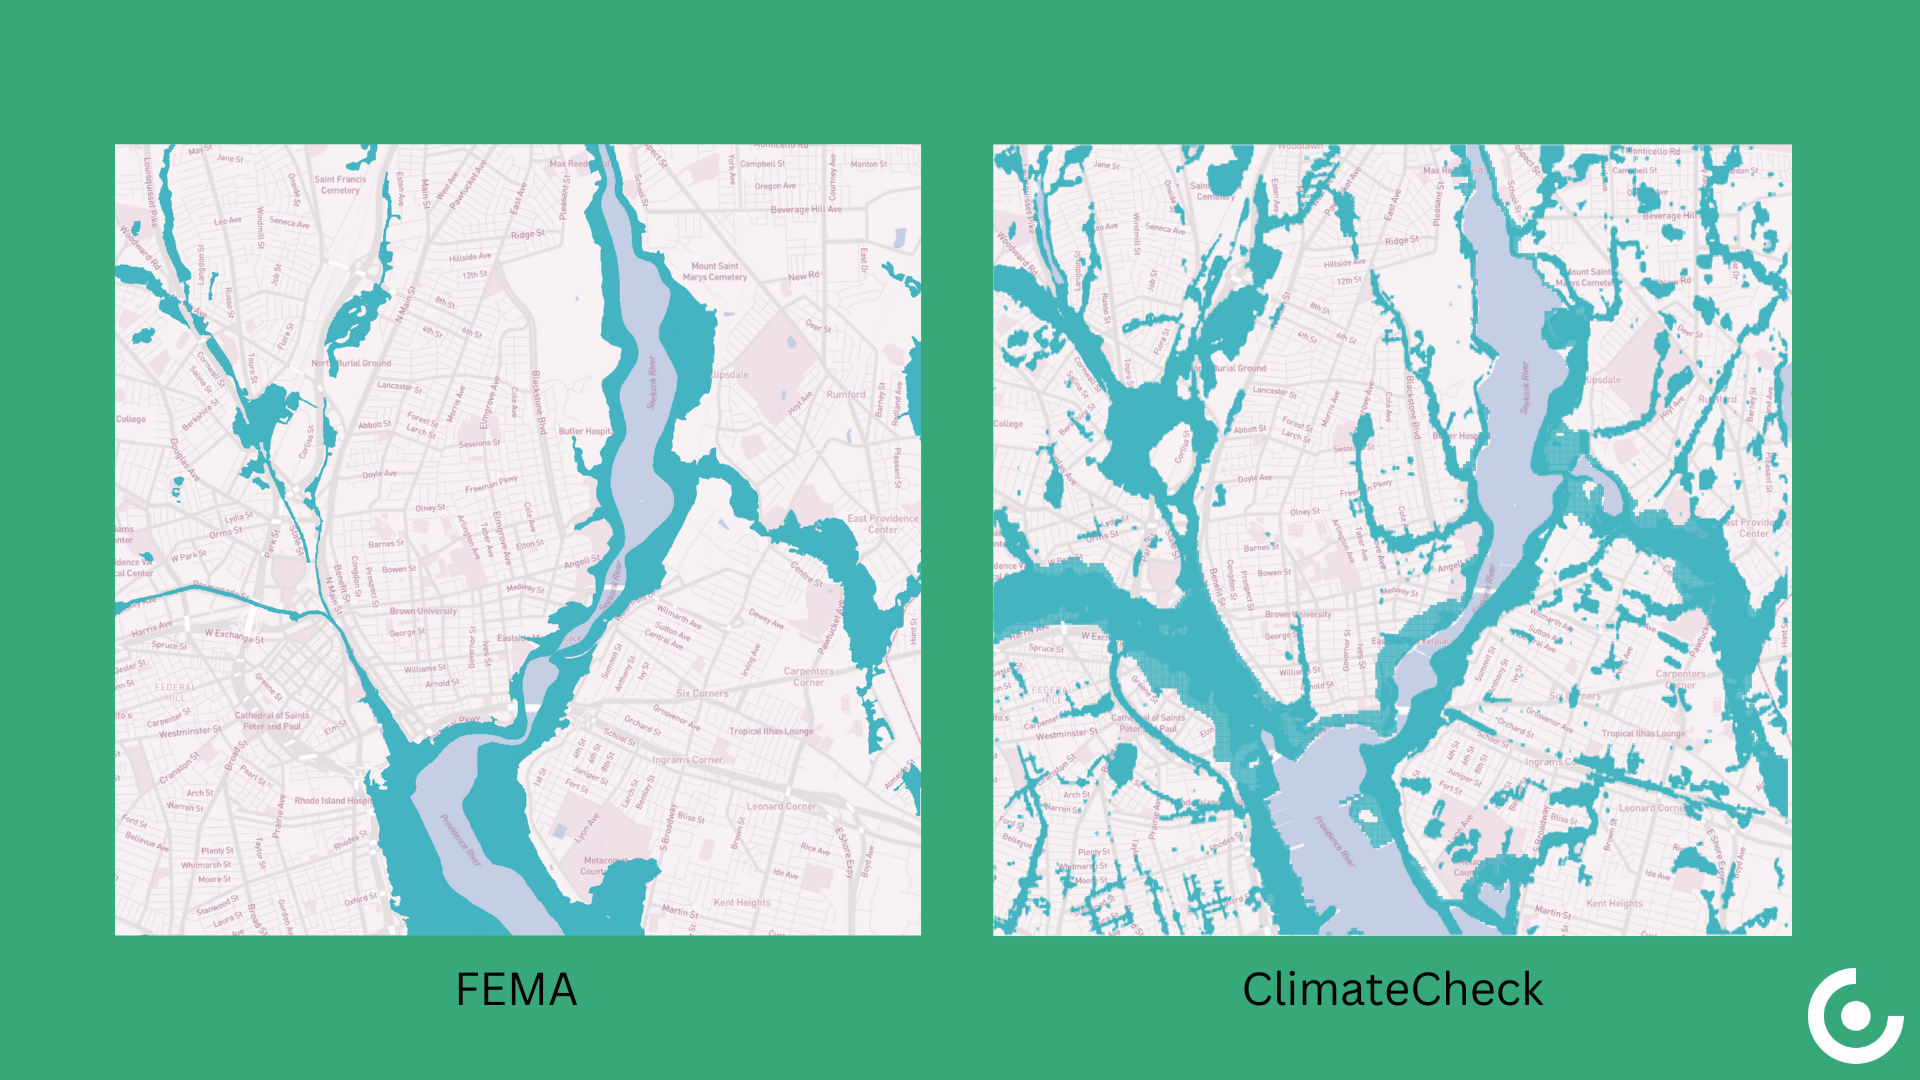 The image on the left is a depiction of potential flooding in Providence, RI based only on FEMA flood map data. The image on the right depicts projected flooding under the RCP8.5 warming scenario based on ClimateCheck's more comprehensive analysis.